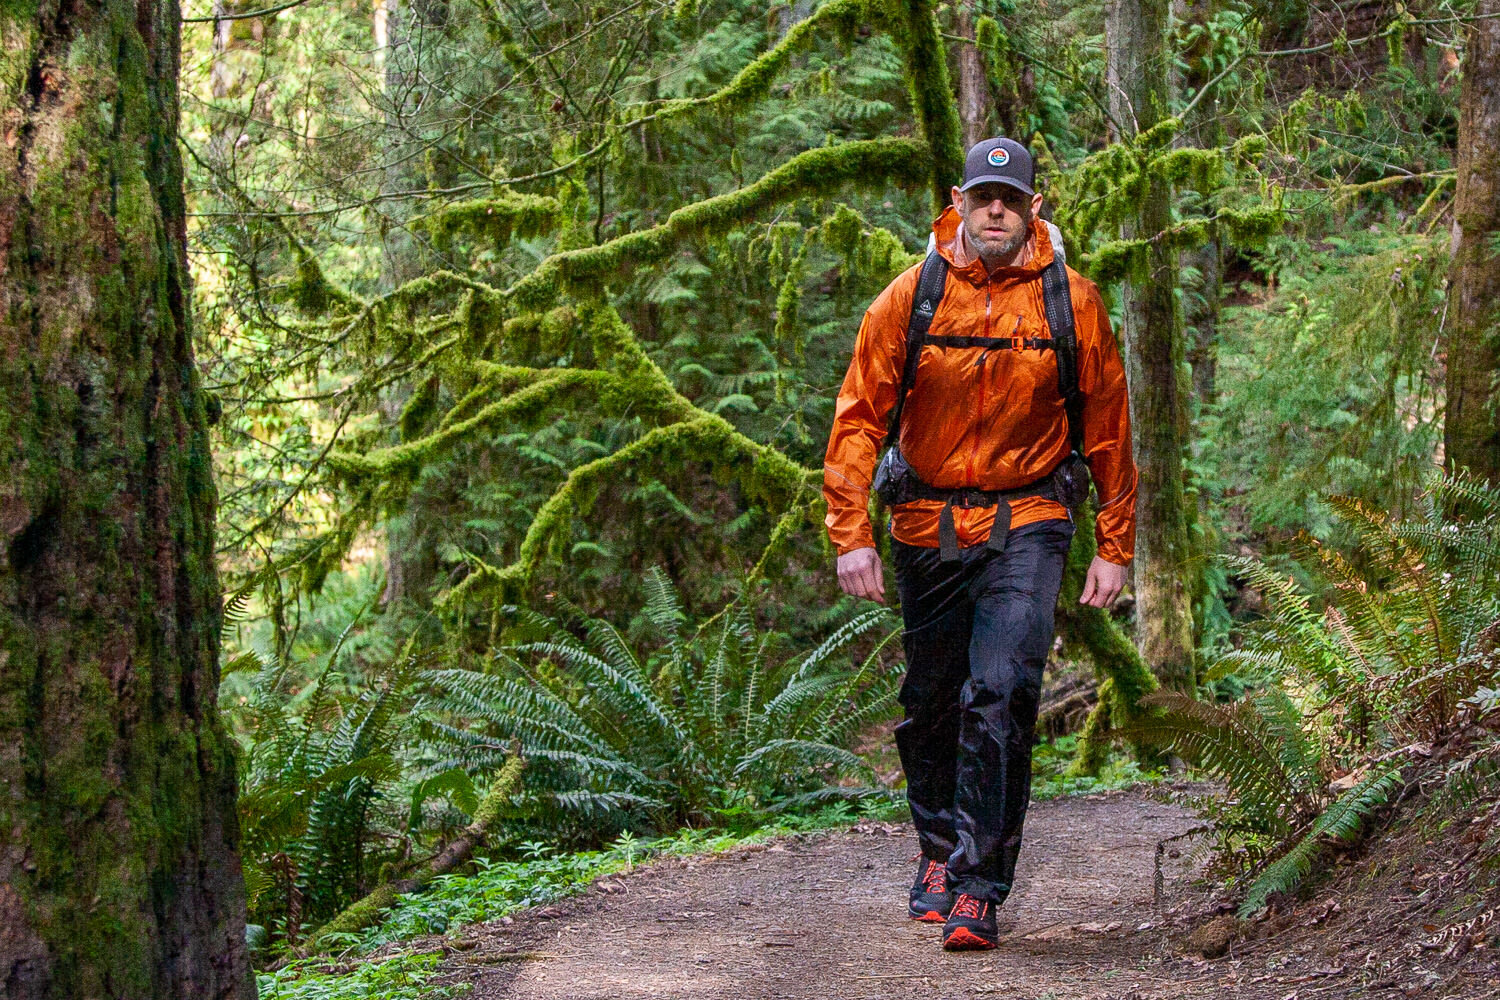 The Helium doesn’t have pit zips, but since it’s lightweight, it’s comfortable to hike in